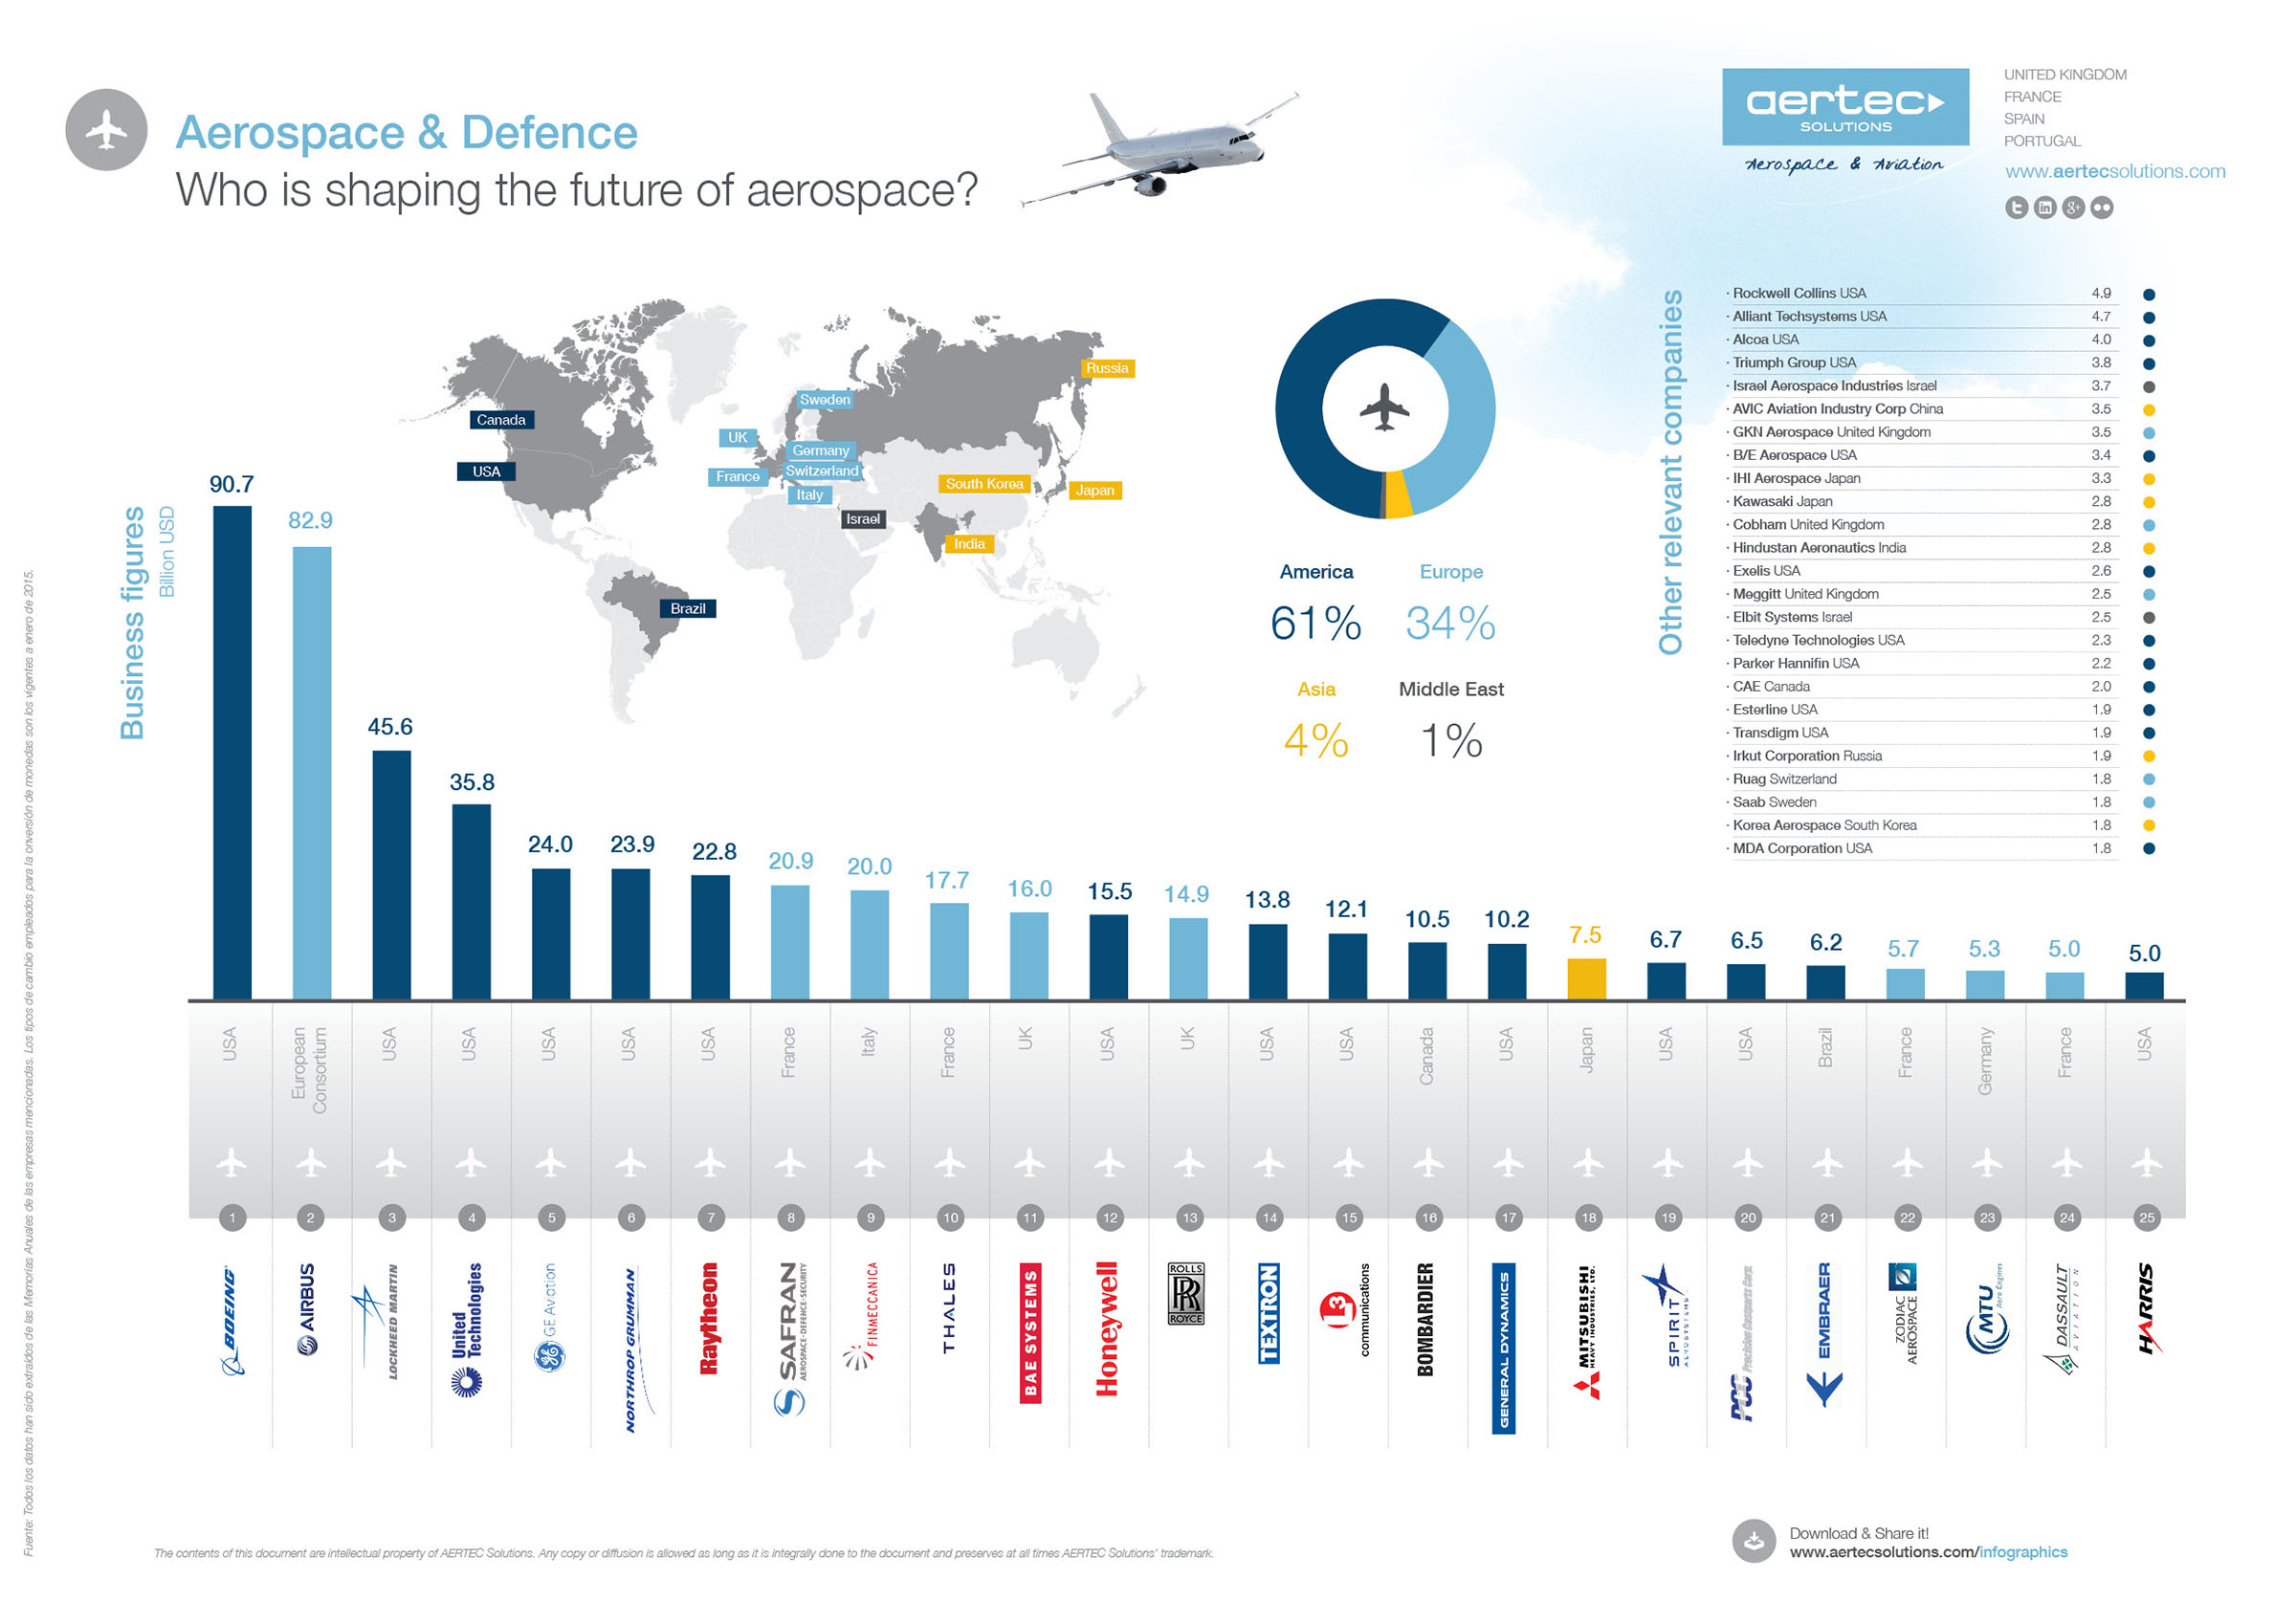 The Aerospace & Defence sector’s top 50 companies